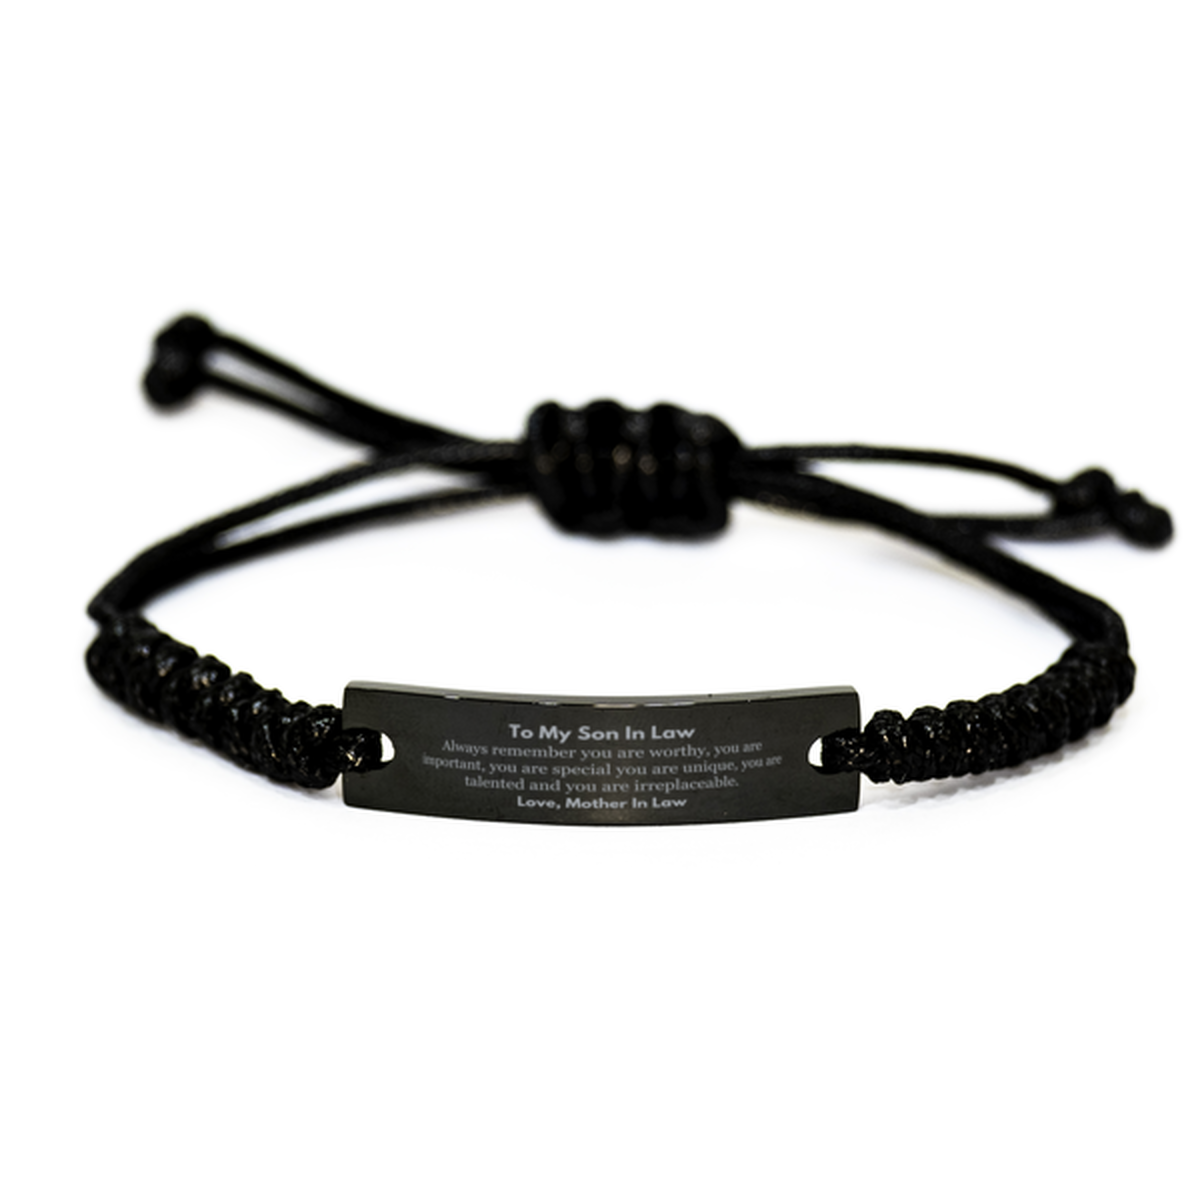 Son In Law Birthday Gifts from Mother In Law, Inspirational Black Rope Bracelet for Son In Law Christmas Graduation Gifts for Son In Law Always remember you are worthy, you are important. Love, Mother In Law